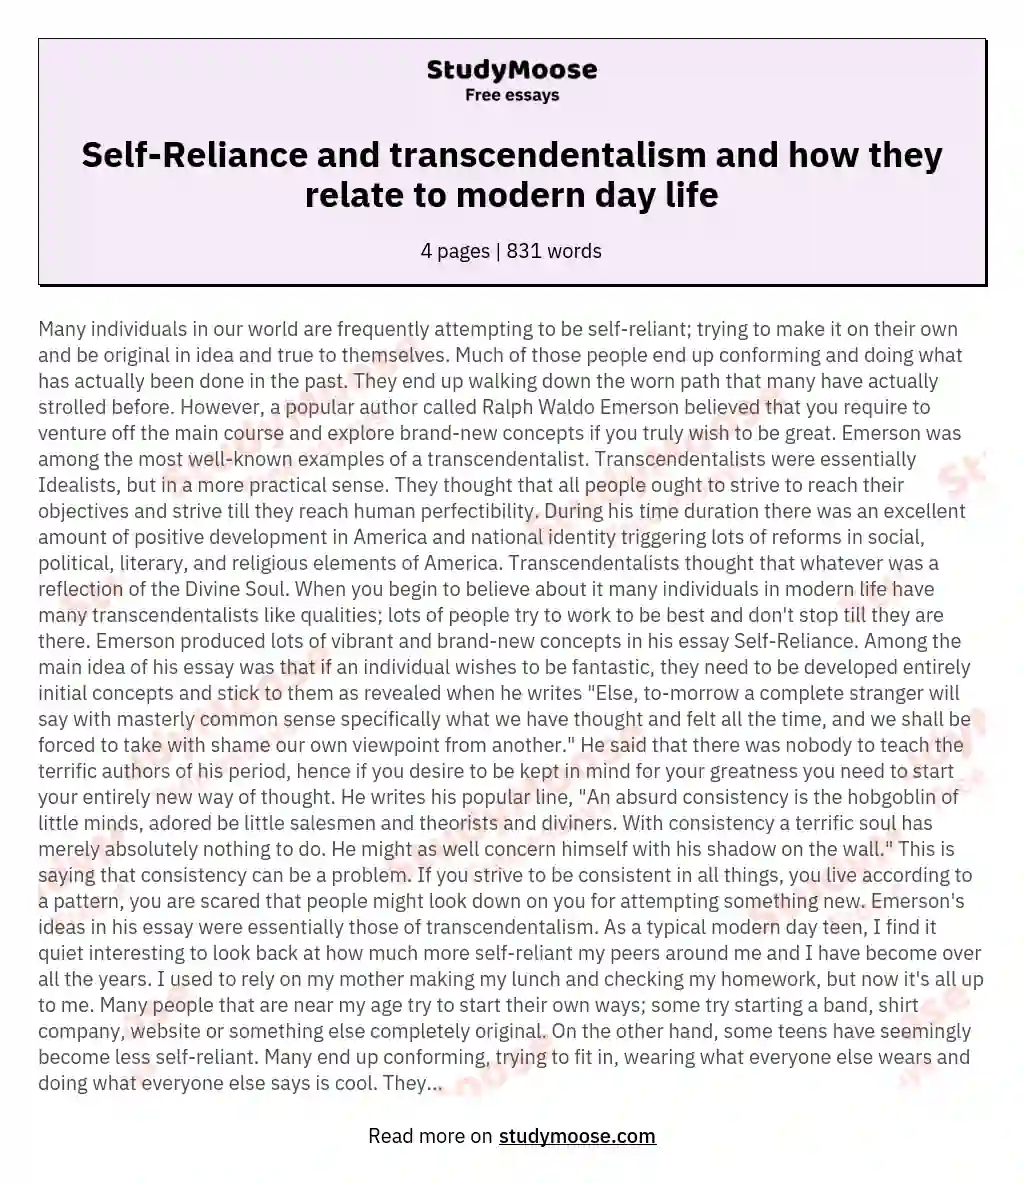 Self-Reliance and transcendentalism and how they relate to modern day life essay